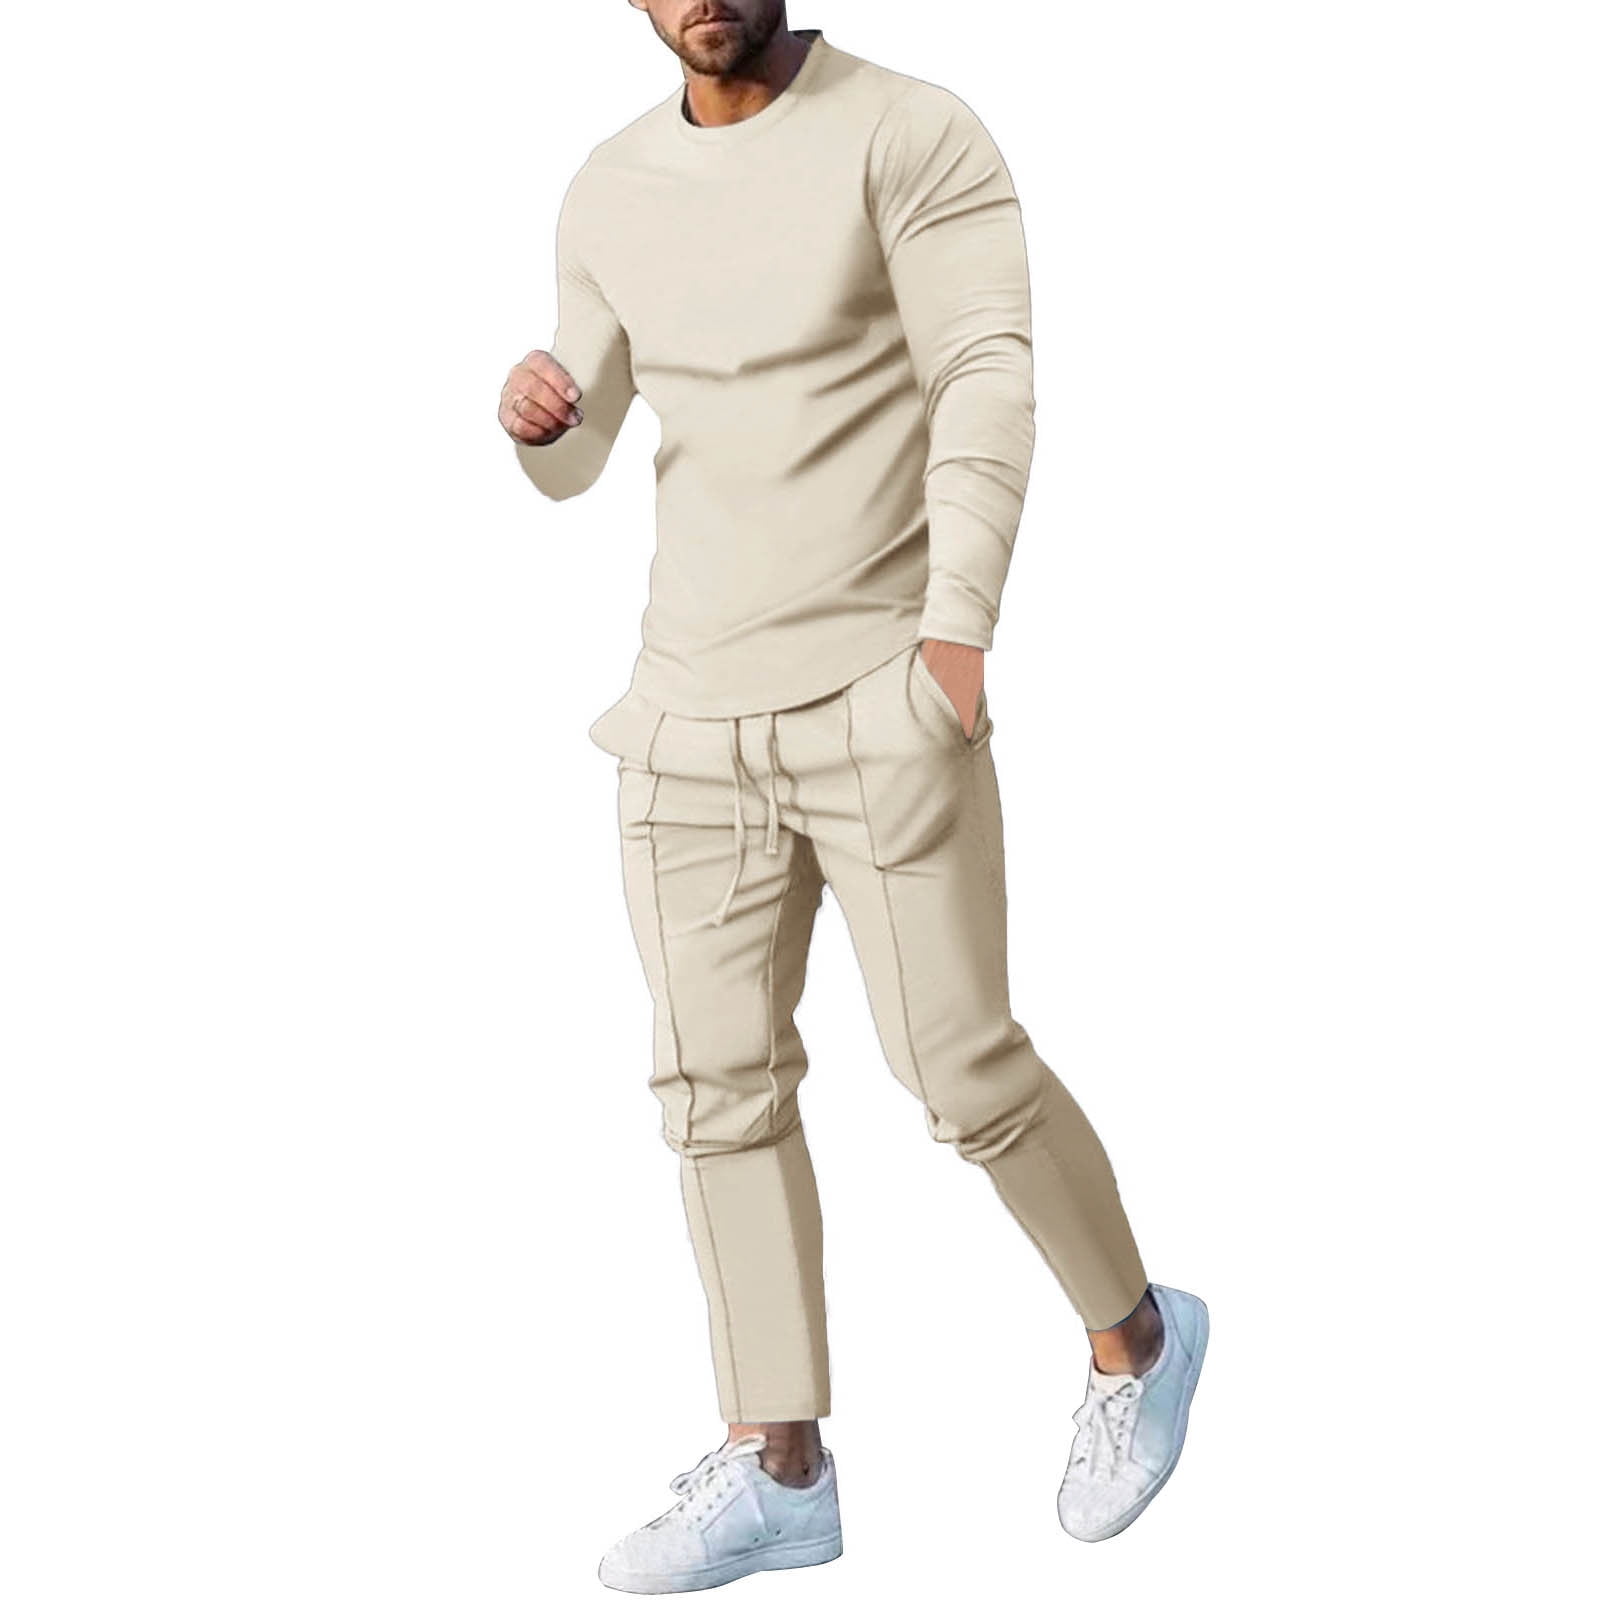 Men's Sweatsuits Casual 2 Piece Hooded Outfits Hoodies and Pants Suits Lace  Up Long Sleeve Suits Solid Color Sets(Beige,Small) at  Men's Clothing  store